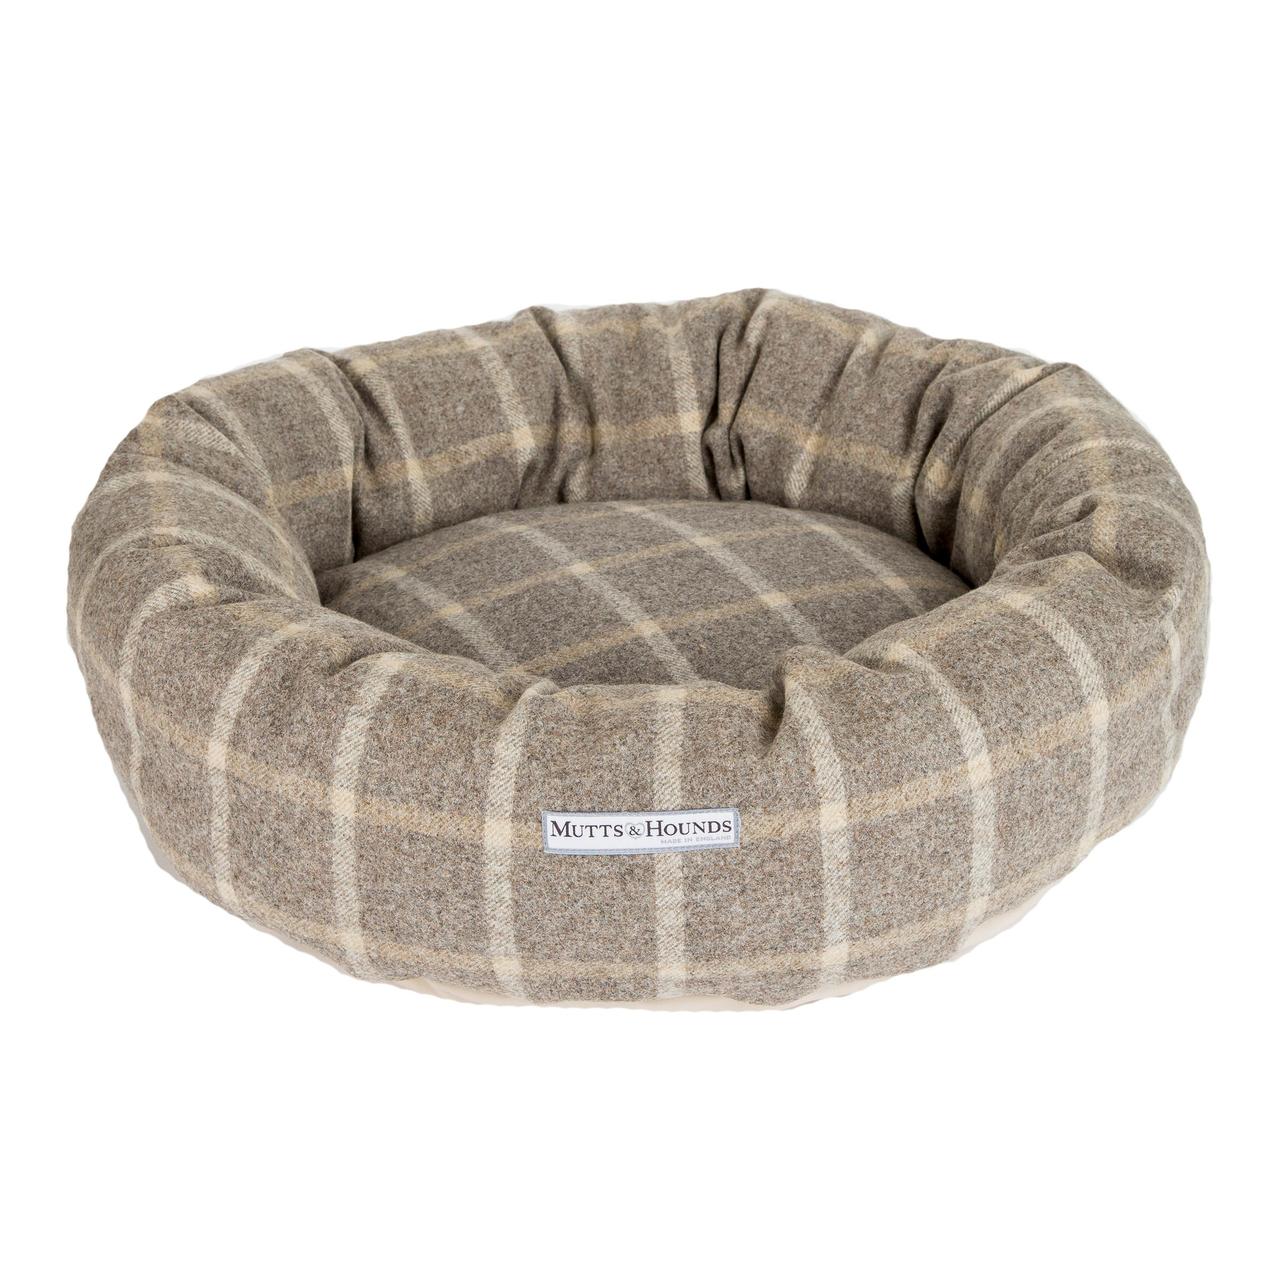 An image of Mutts & Hounds Slate Tweed Donut Bed Medium